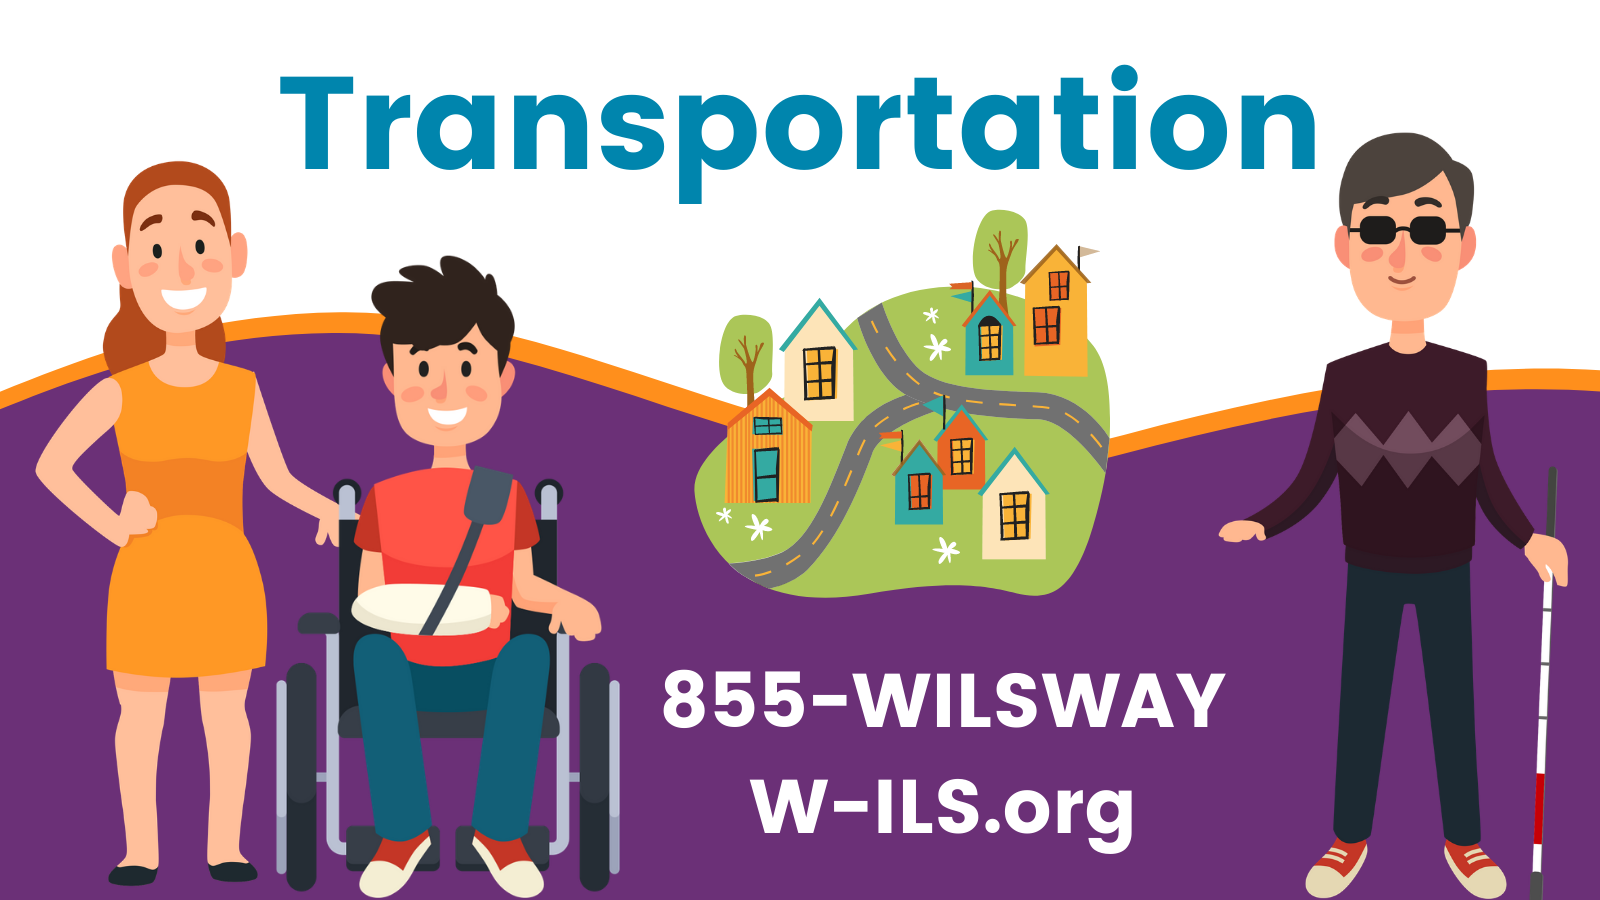 Get transportation with WILS.  Call 855-WILSWAY or visit W-ILS.org